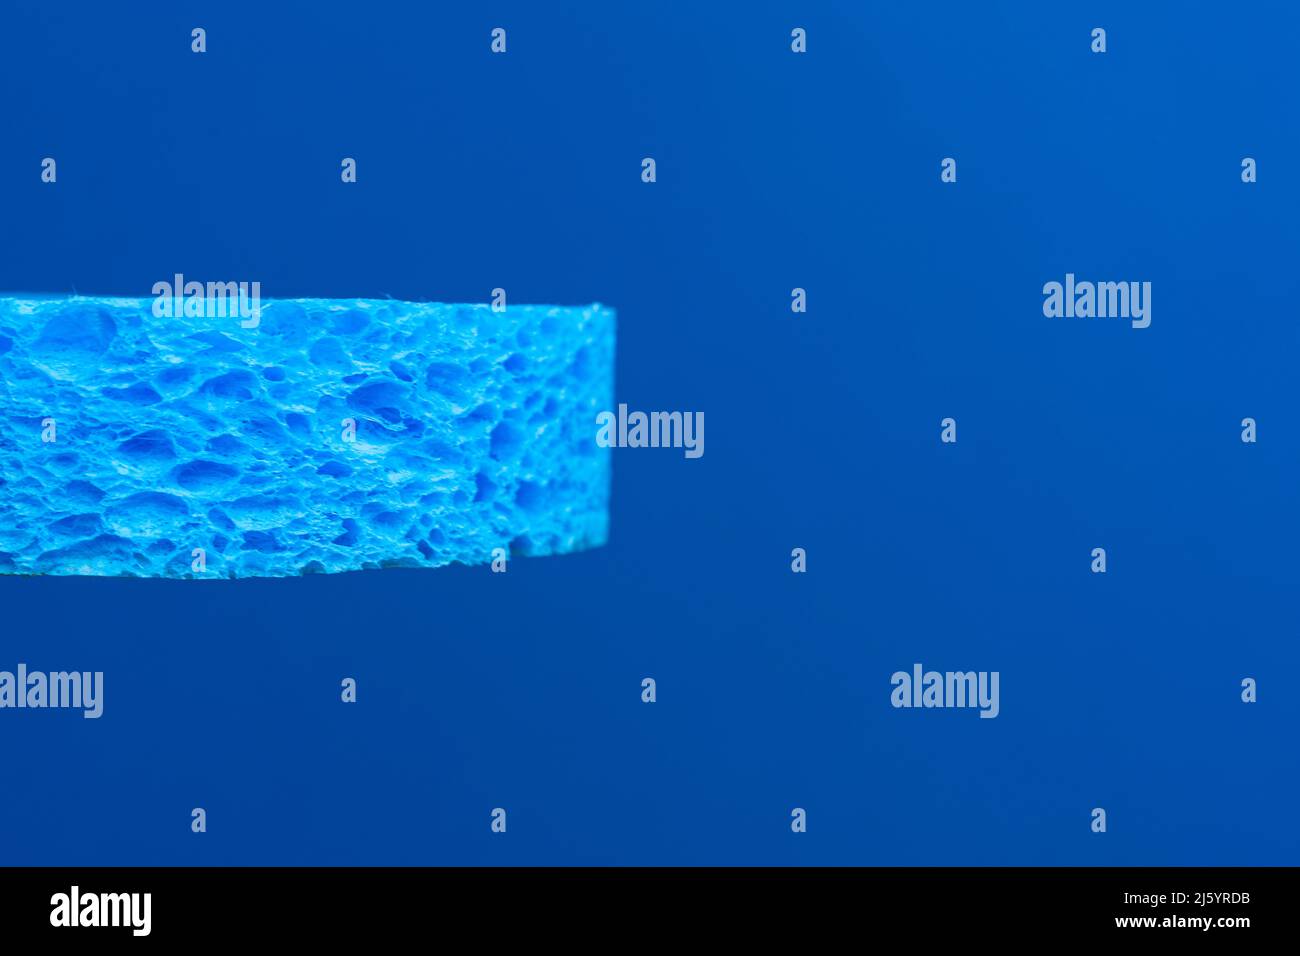 a blue sponge in front of a blue background Stock Photo